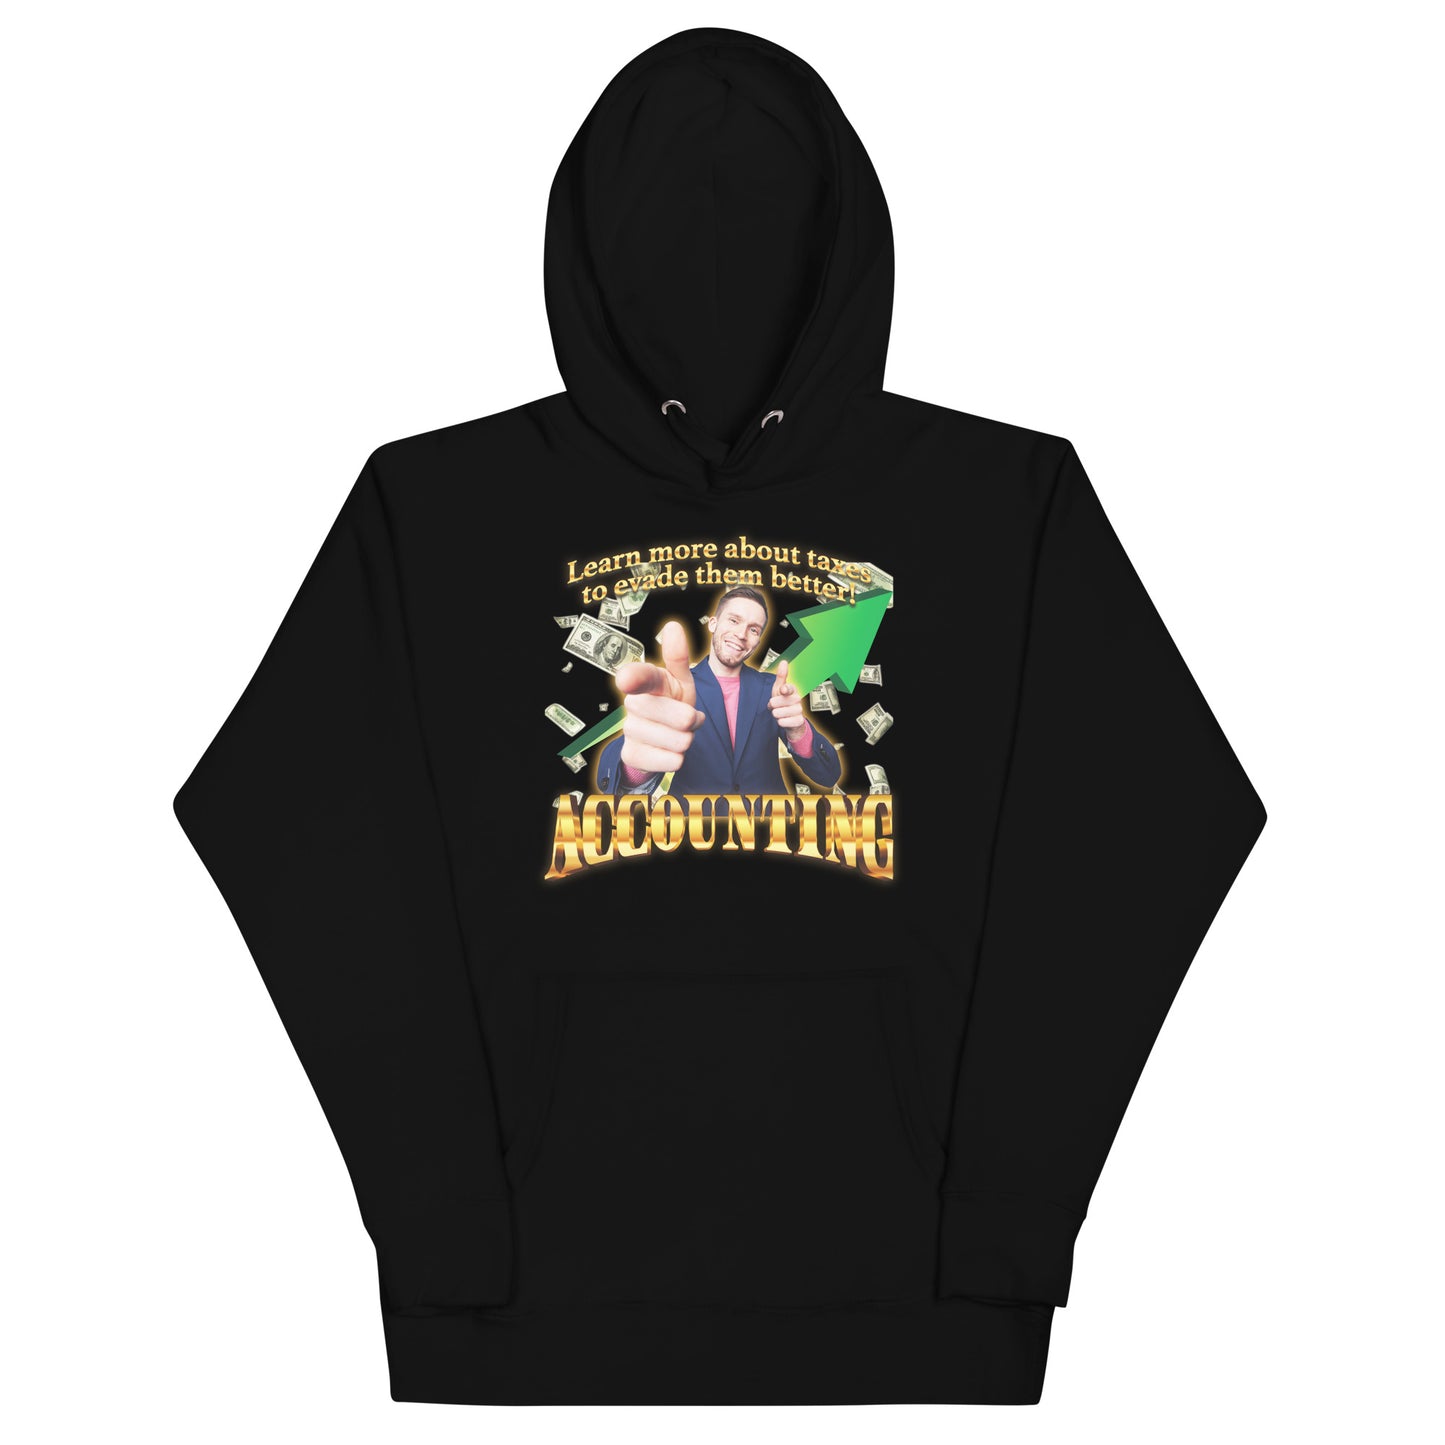 Accounting (Evade Taxes) Unisex Hoodie